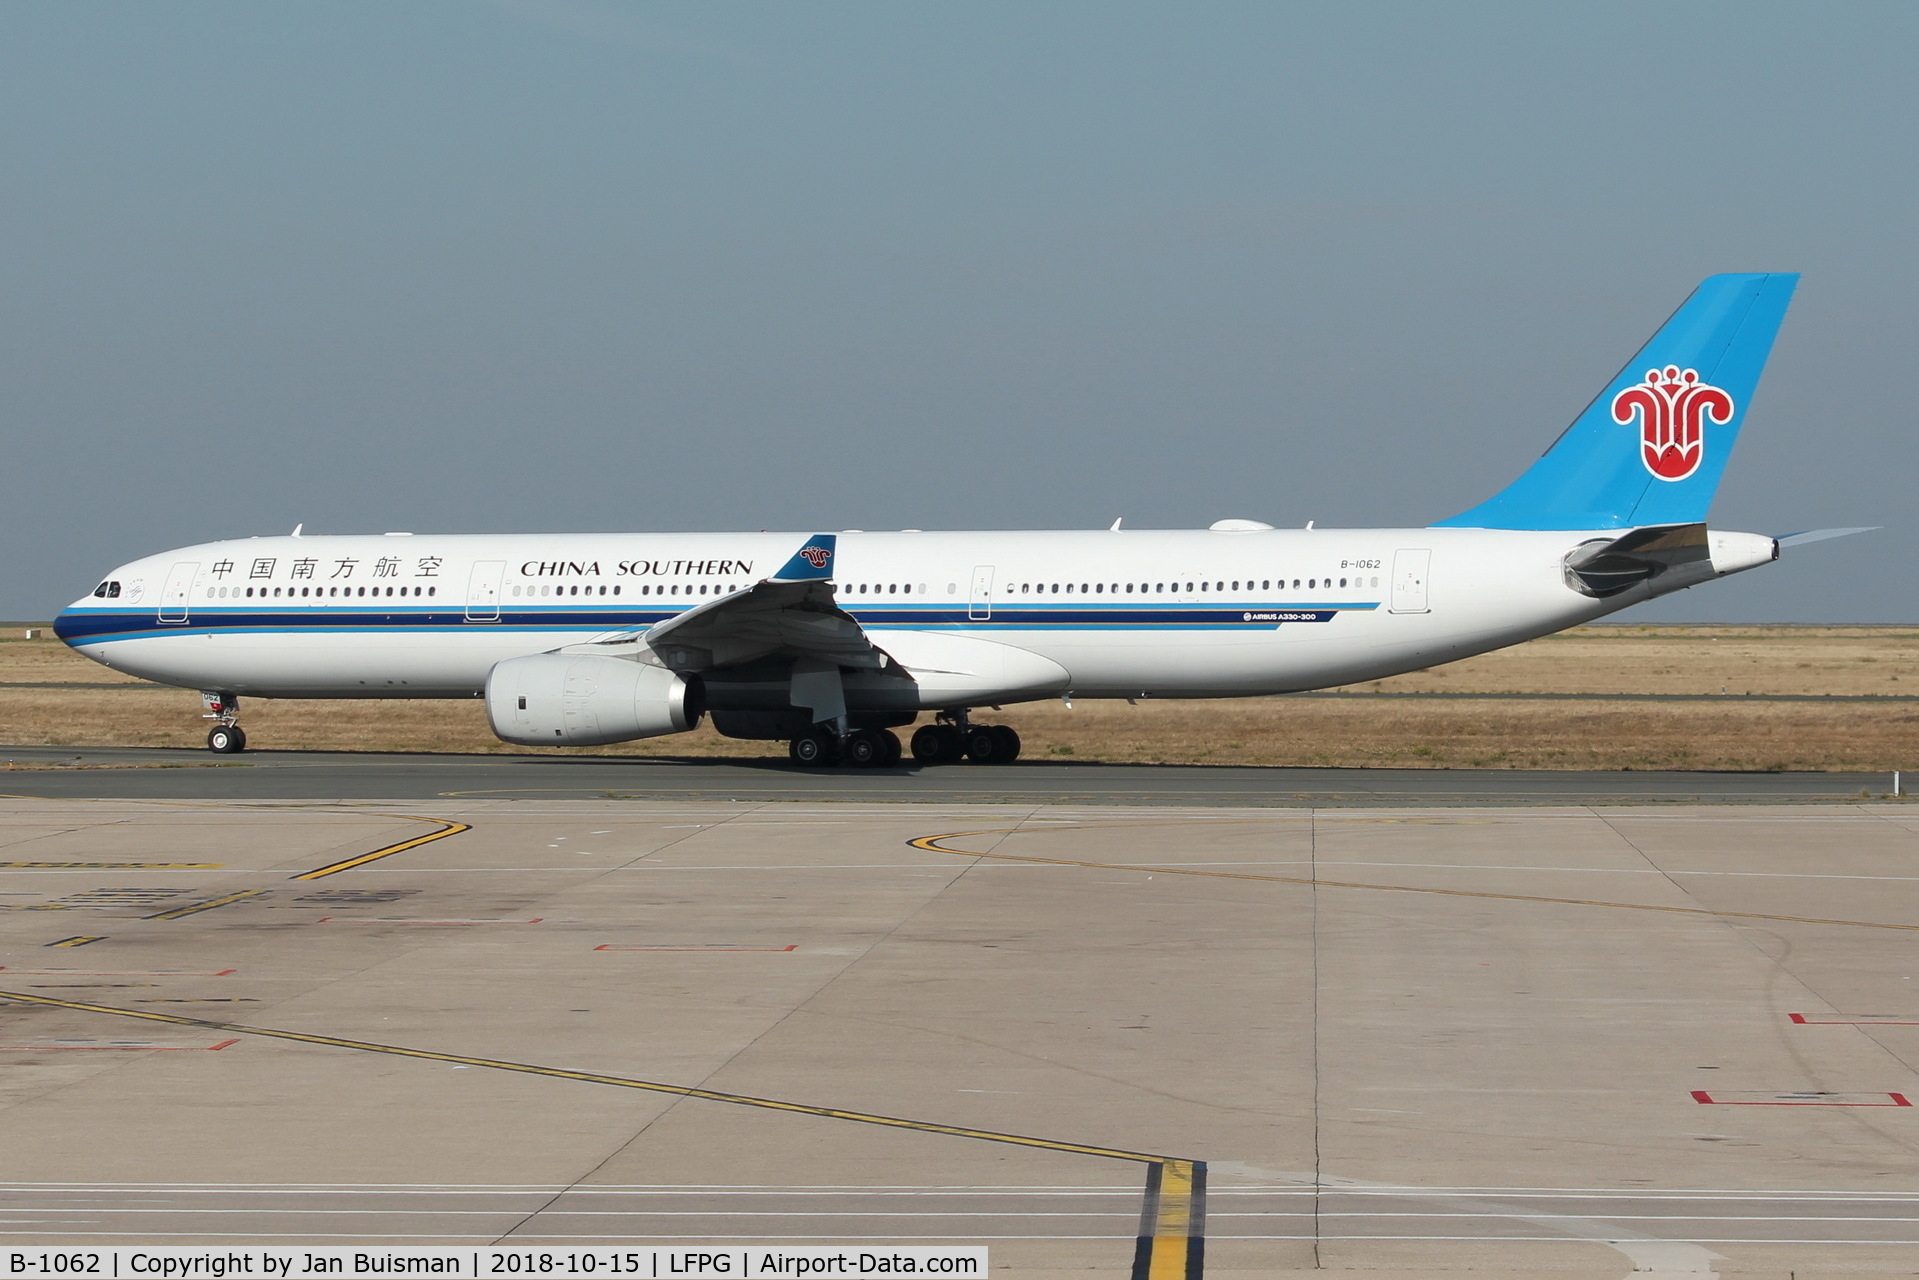 B-1062, 2018 Airbus A330-343E C/N 1846, China Southern Airlines